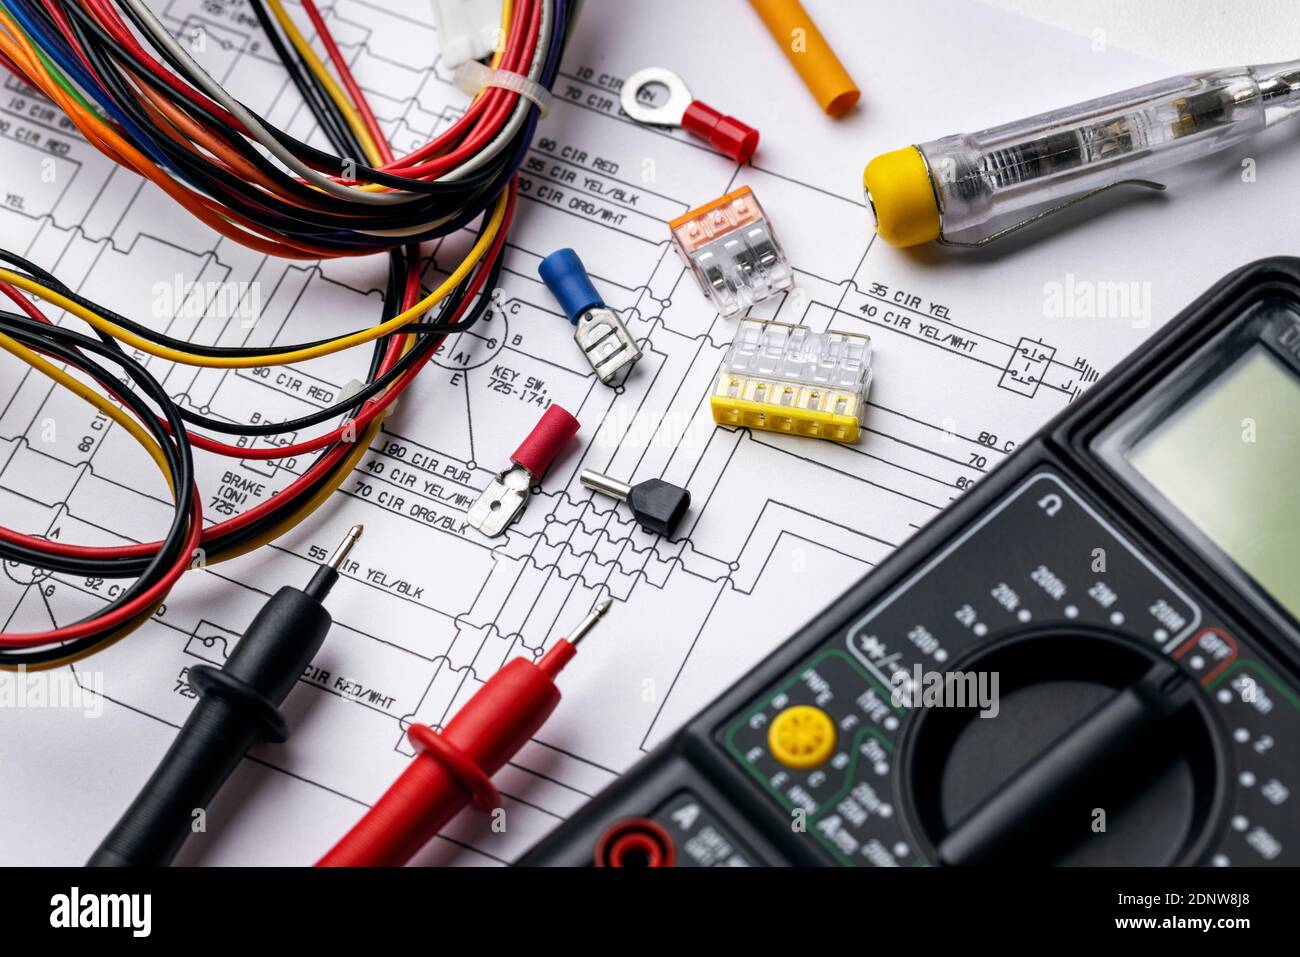 electrician tools and electrical equipment on wiring diagram Stock Photo